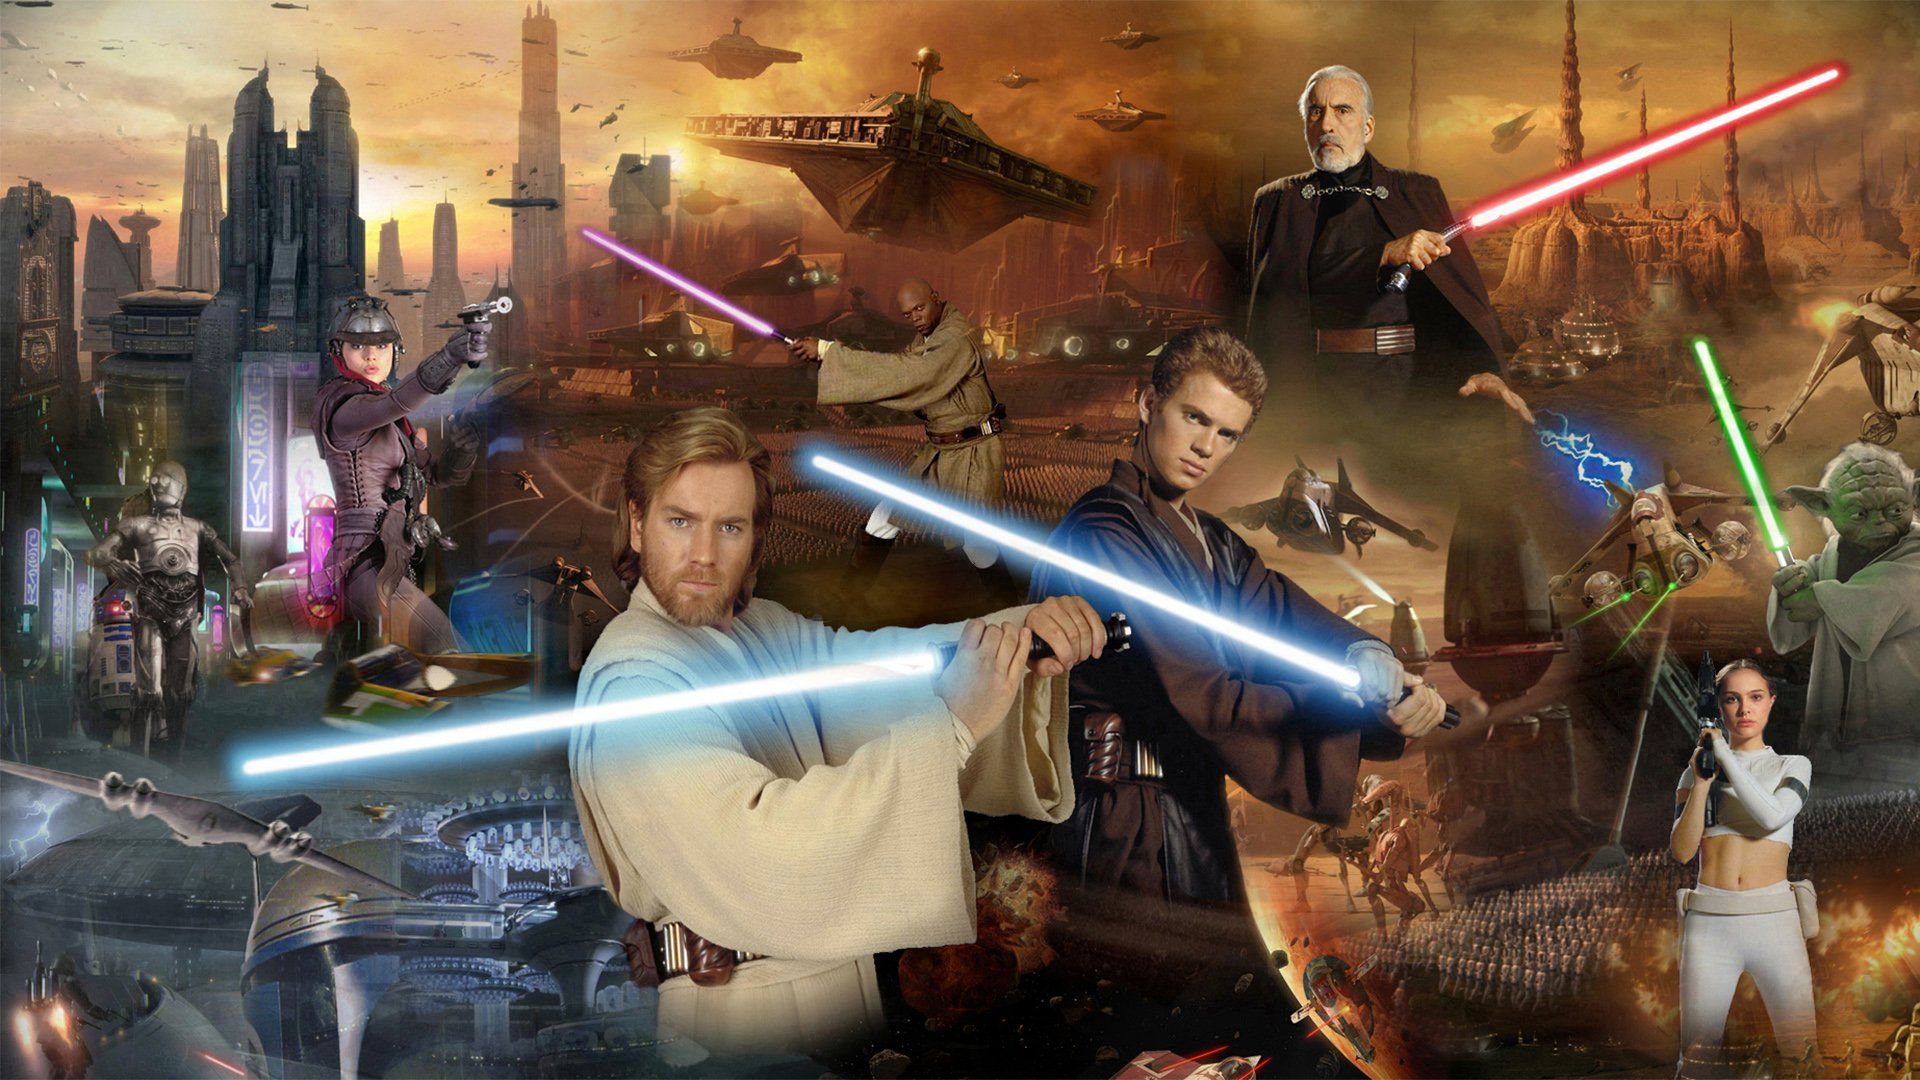 Attack of the Clones Wallpaper Free Attack of the Clones